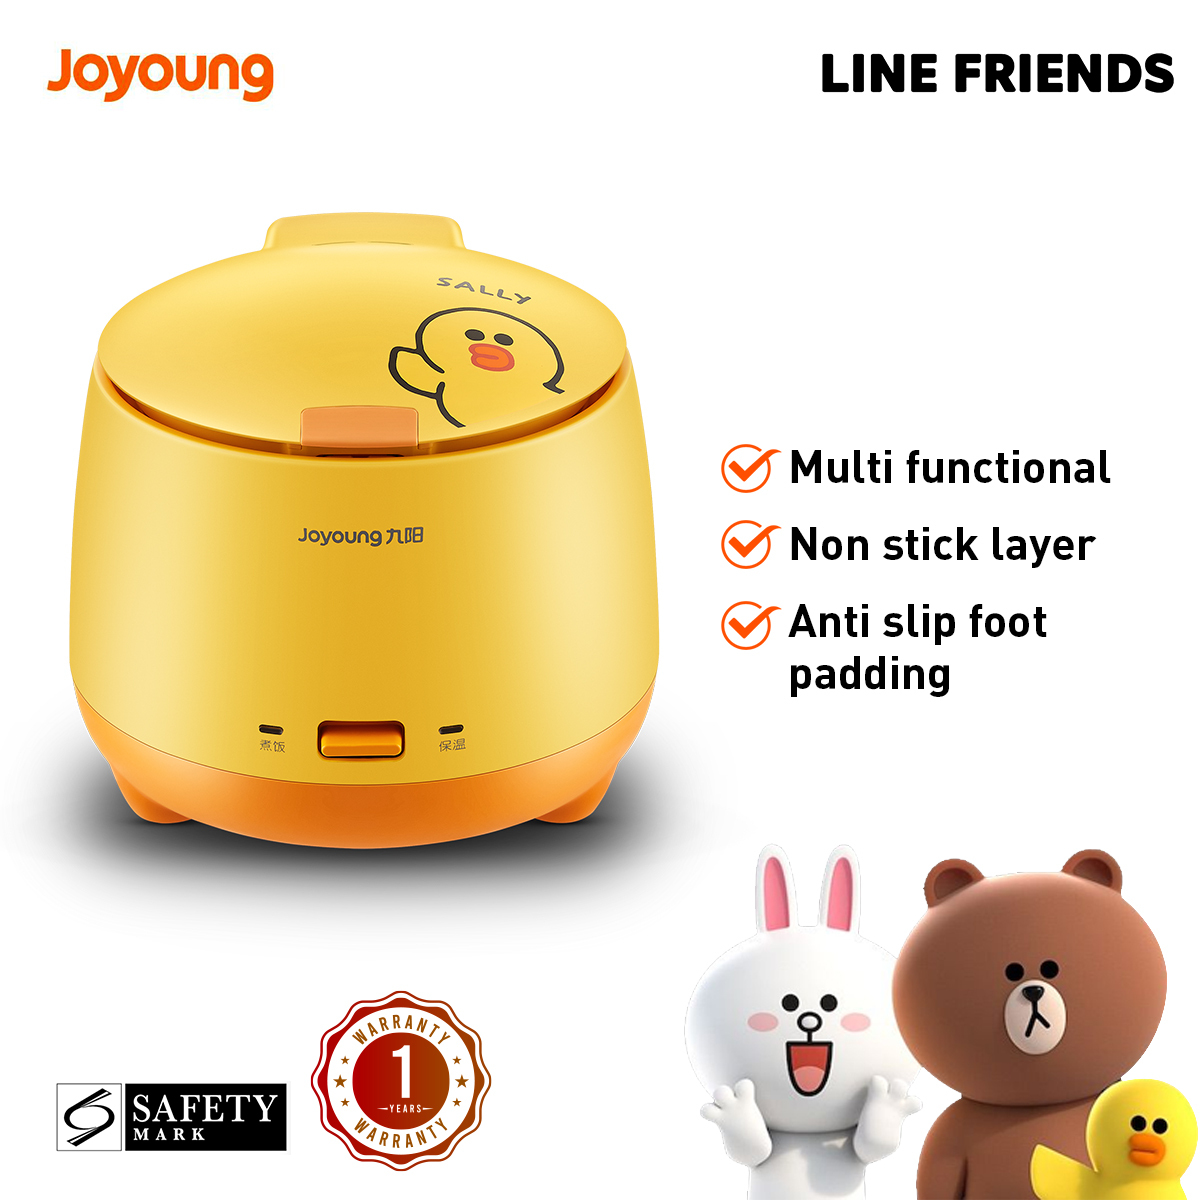 Joyoung Line Friends Sally 1.5L Mini Fast Cook Rice Cooker / 1-2 pax / Safety Mark /1 Year Warranty JT-SJOYOF181SA（电饭锅）